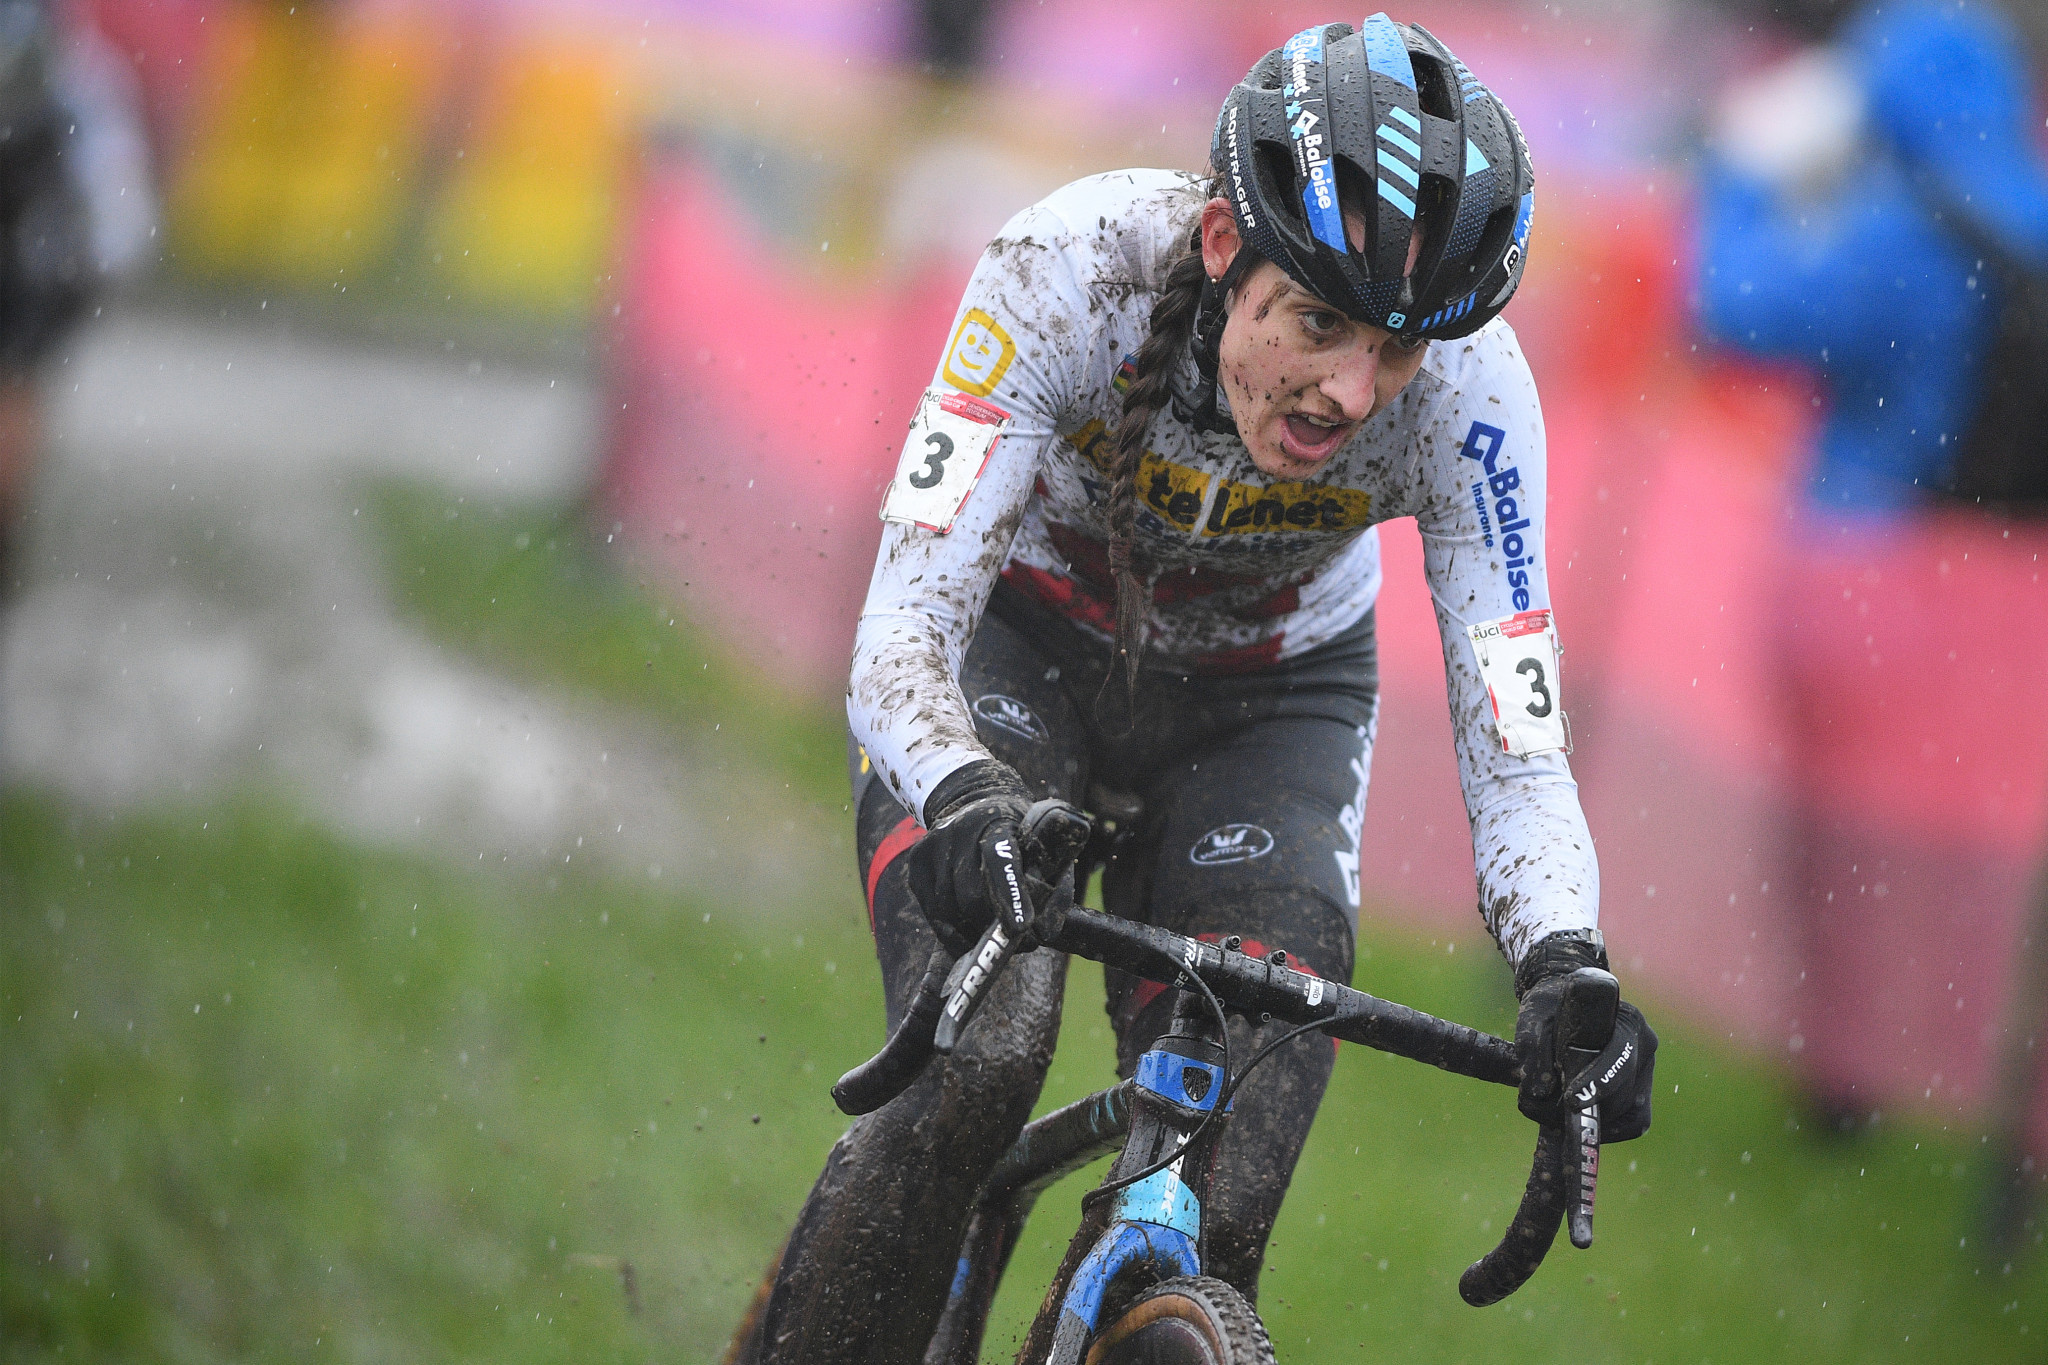 Lucinda Brand of The Netherlands has already clinched the women's UCI Cyclo-Cross World Cup title ©Getty Images